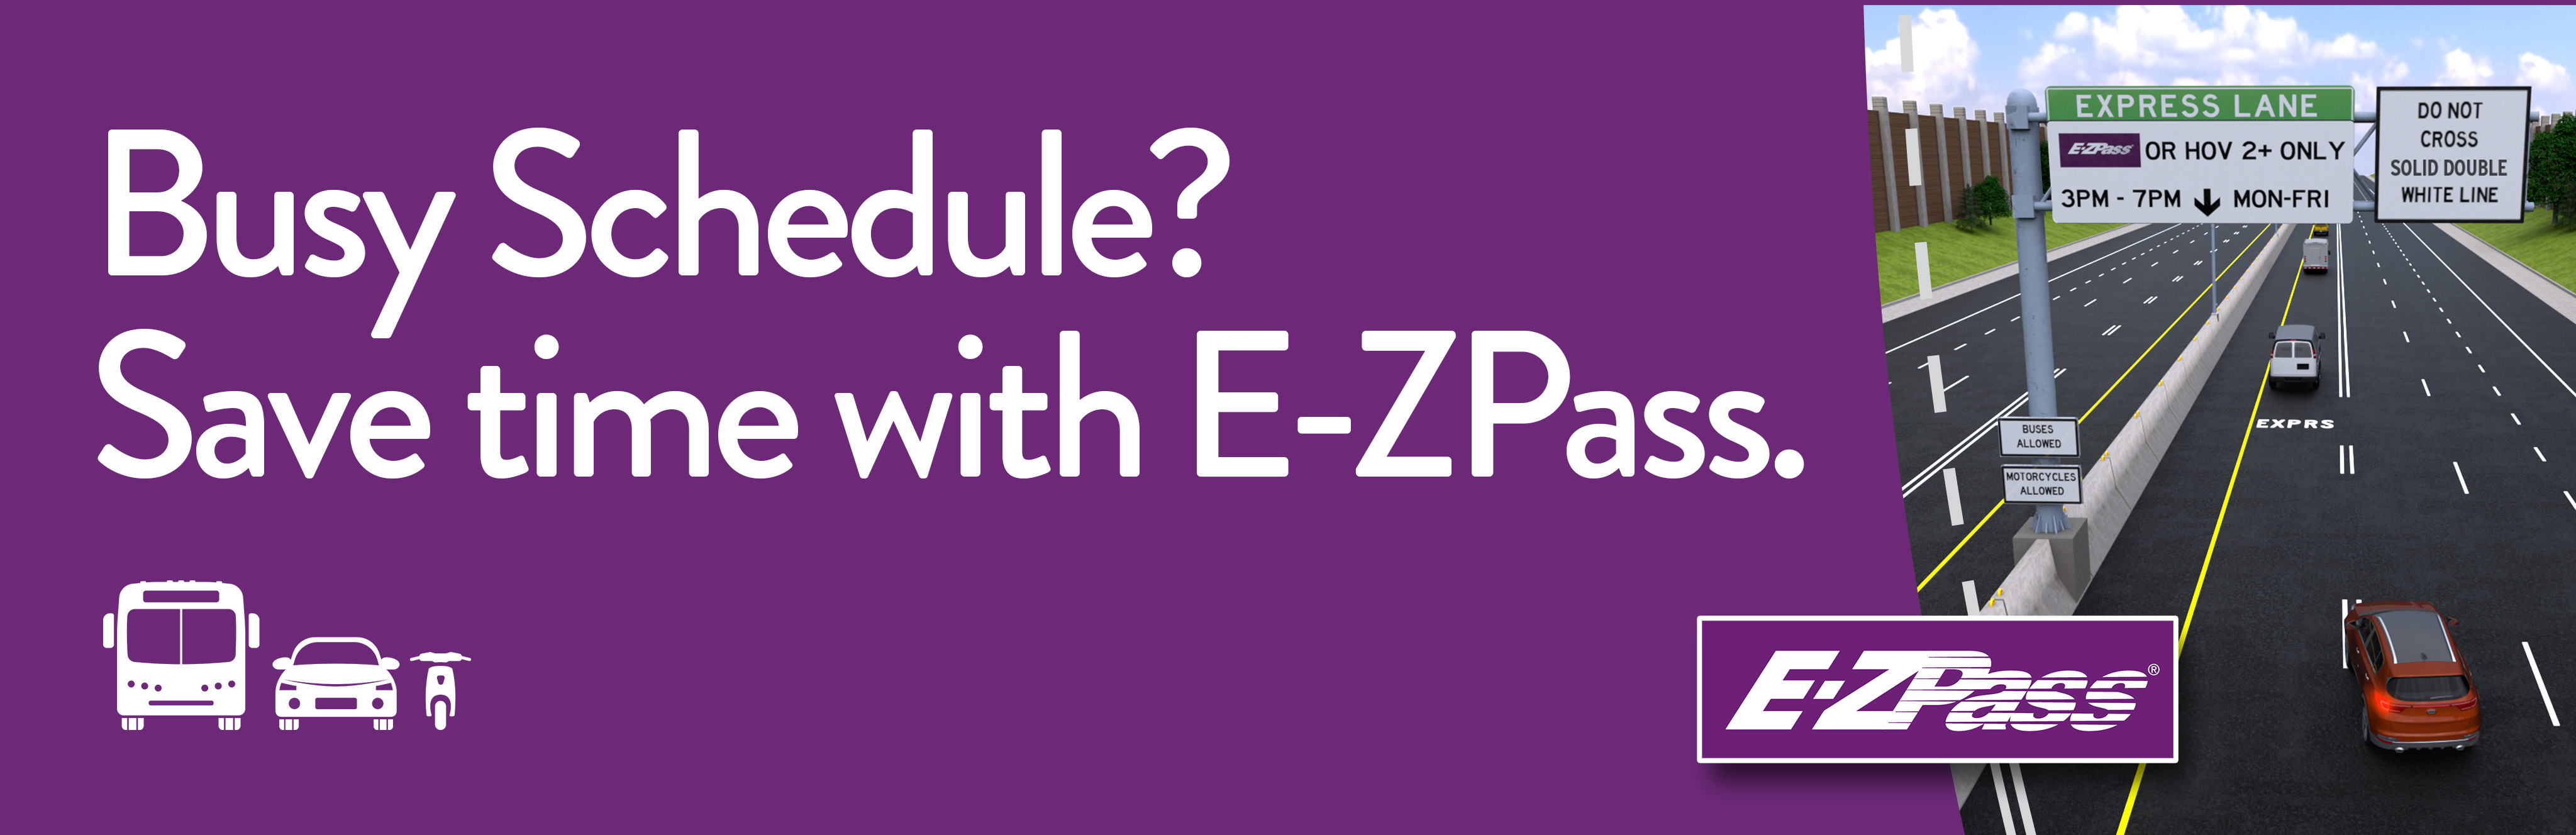 Busy schedule? Save time with E-ZPass